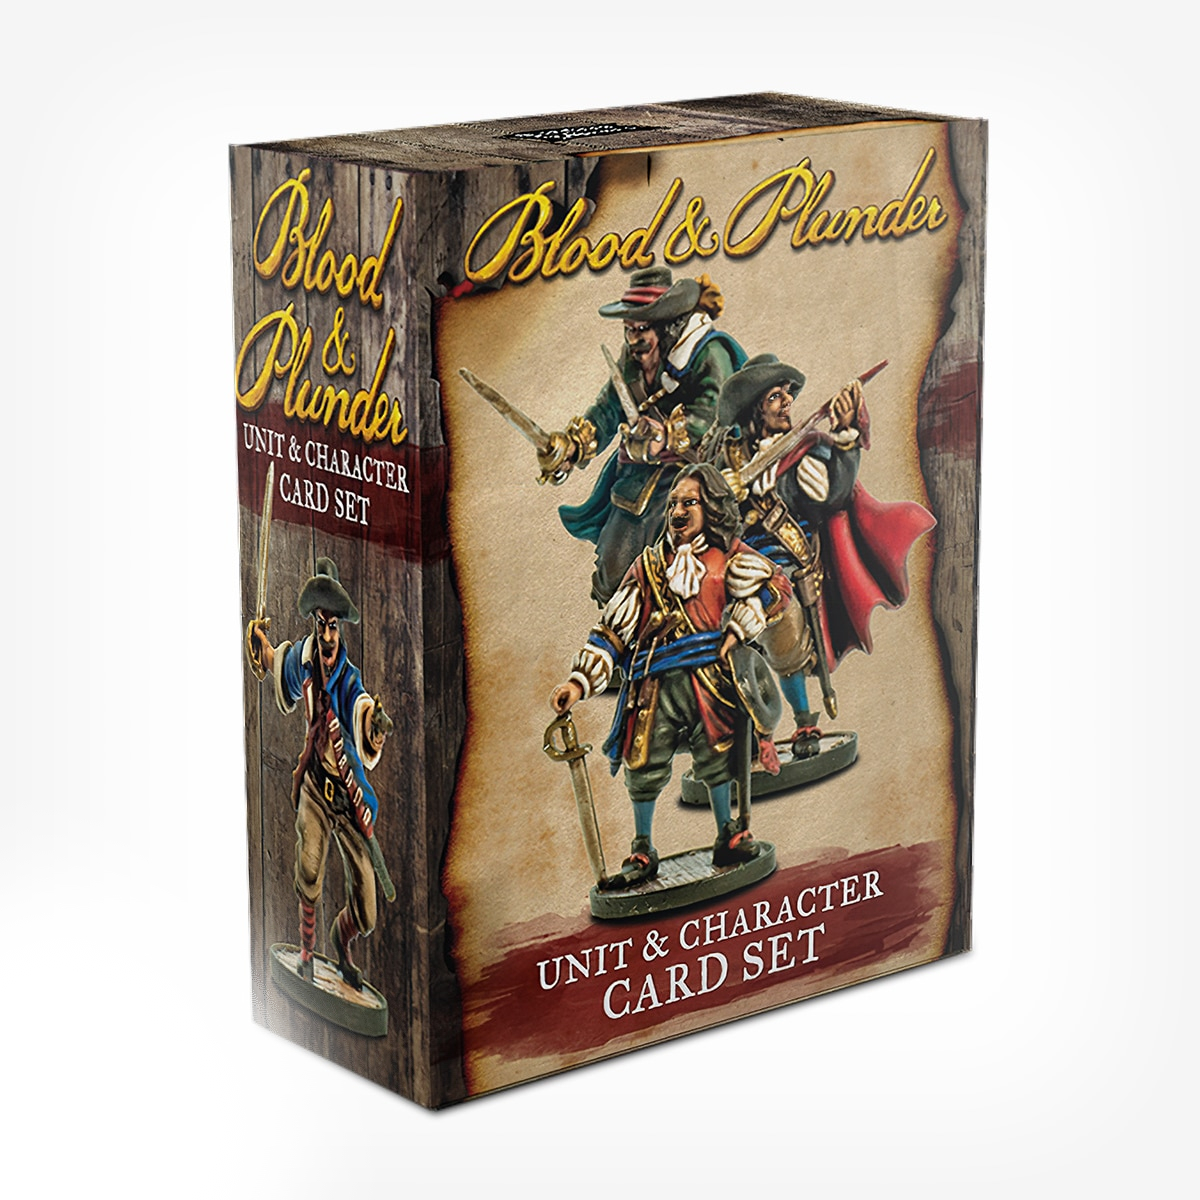 Character card. Blood and Plunder. Blood & Plunder карты. Blood and Plunder Miniatures. Колода карт Blood and Plunder.